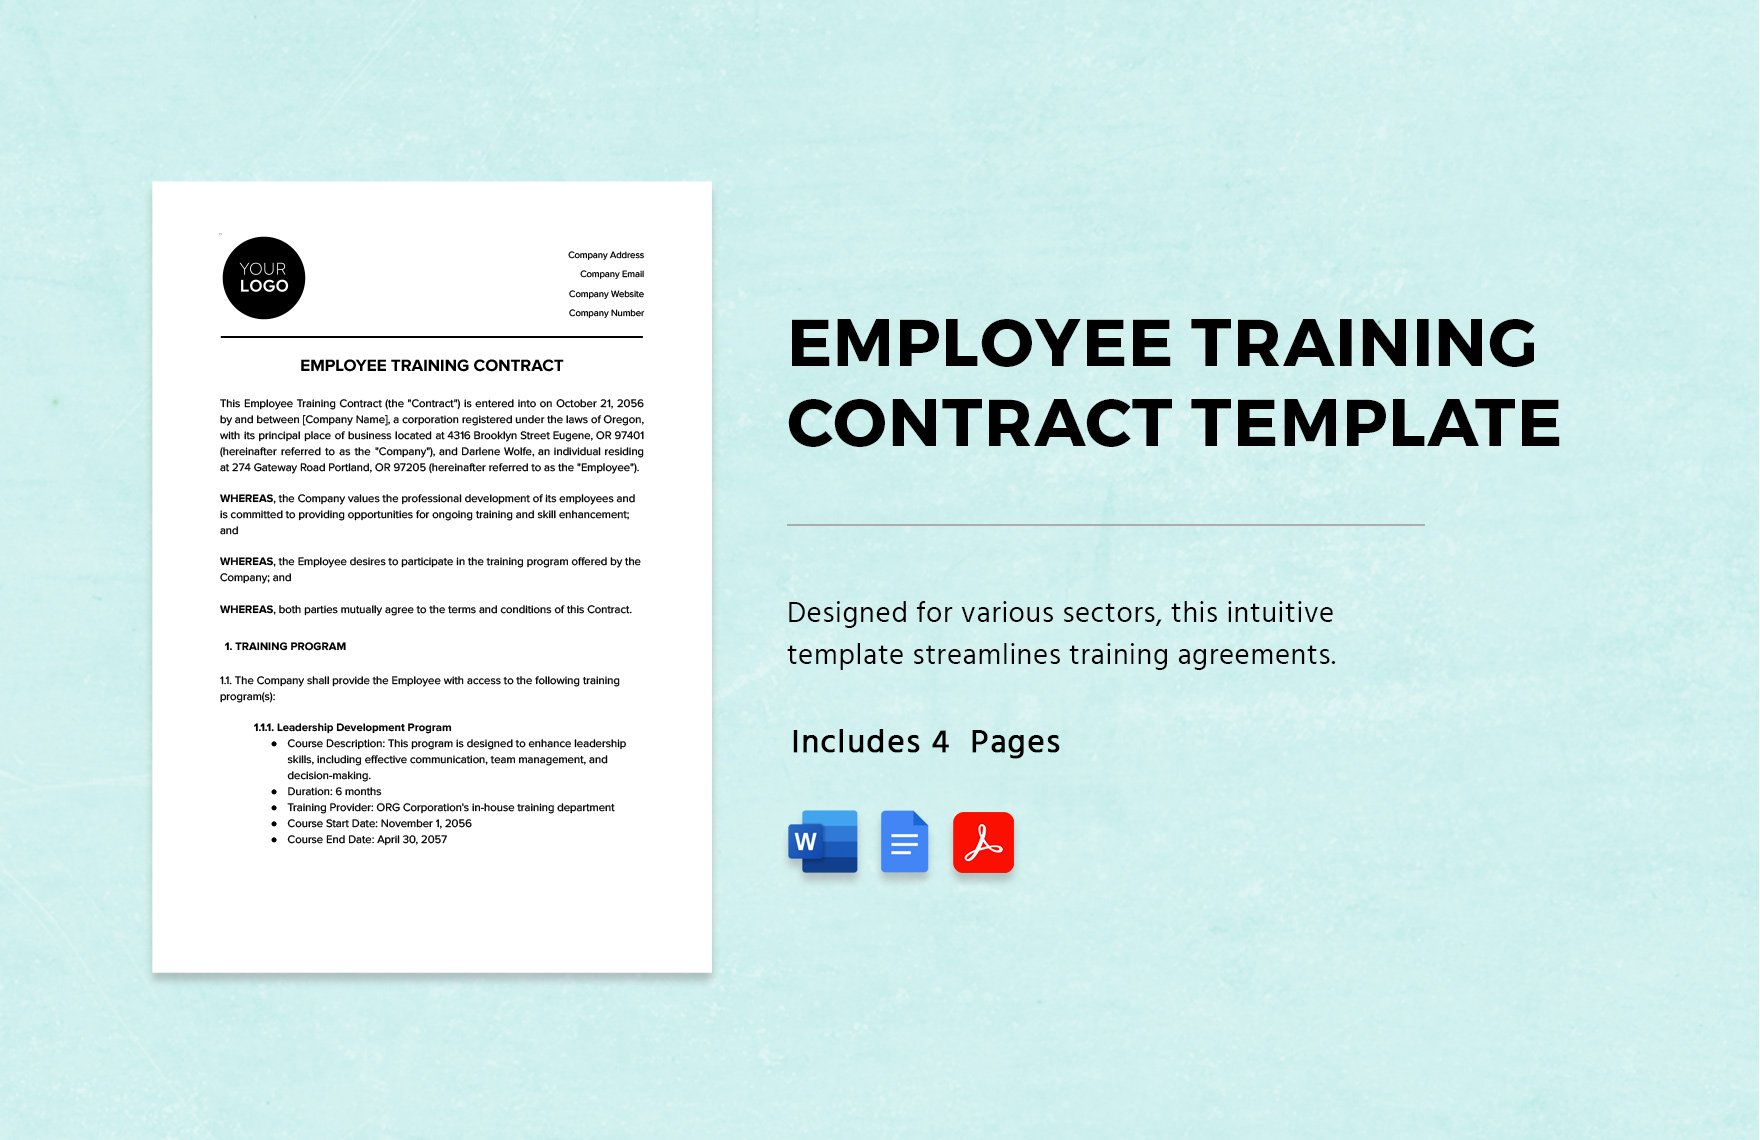 Employee Training Contract HR Template